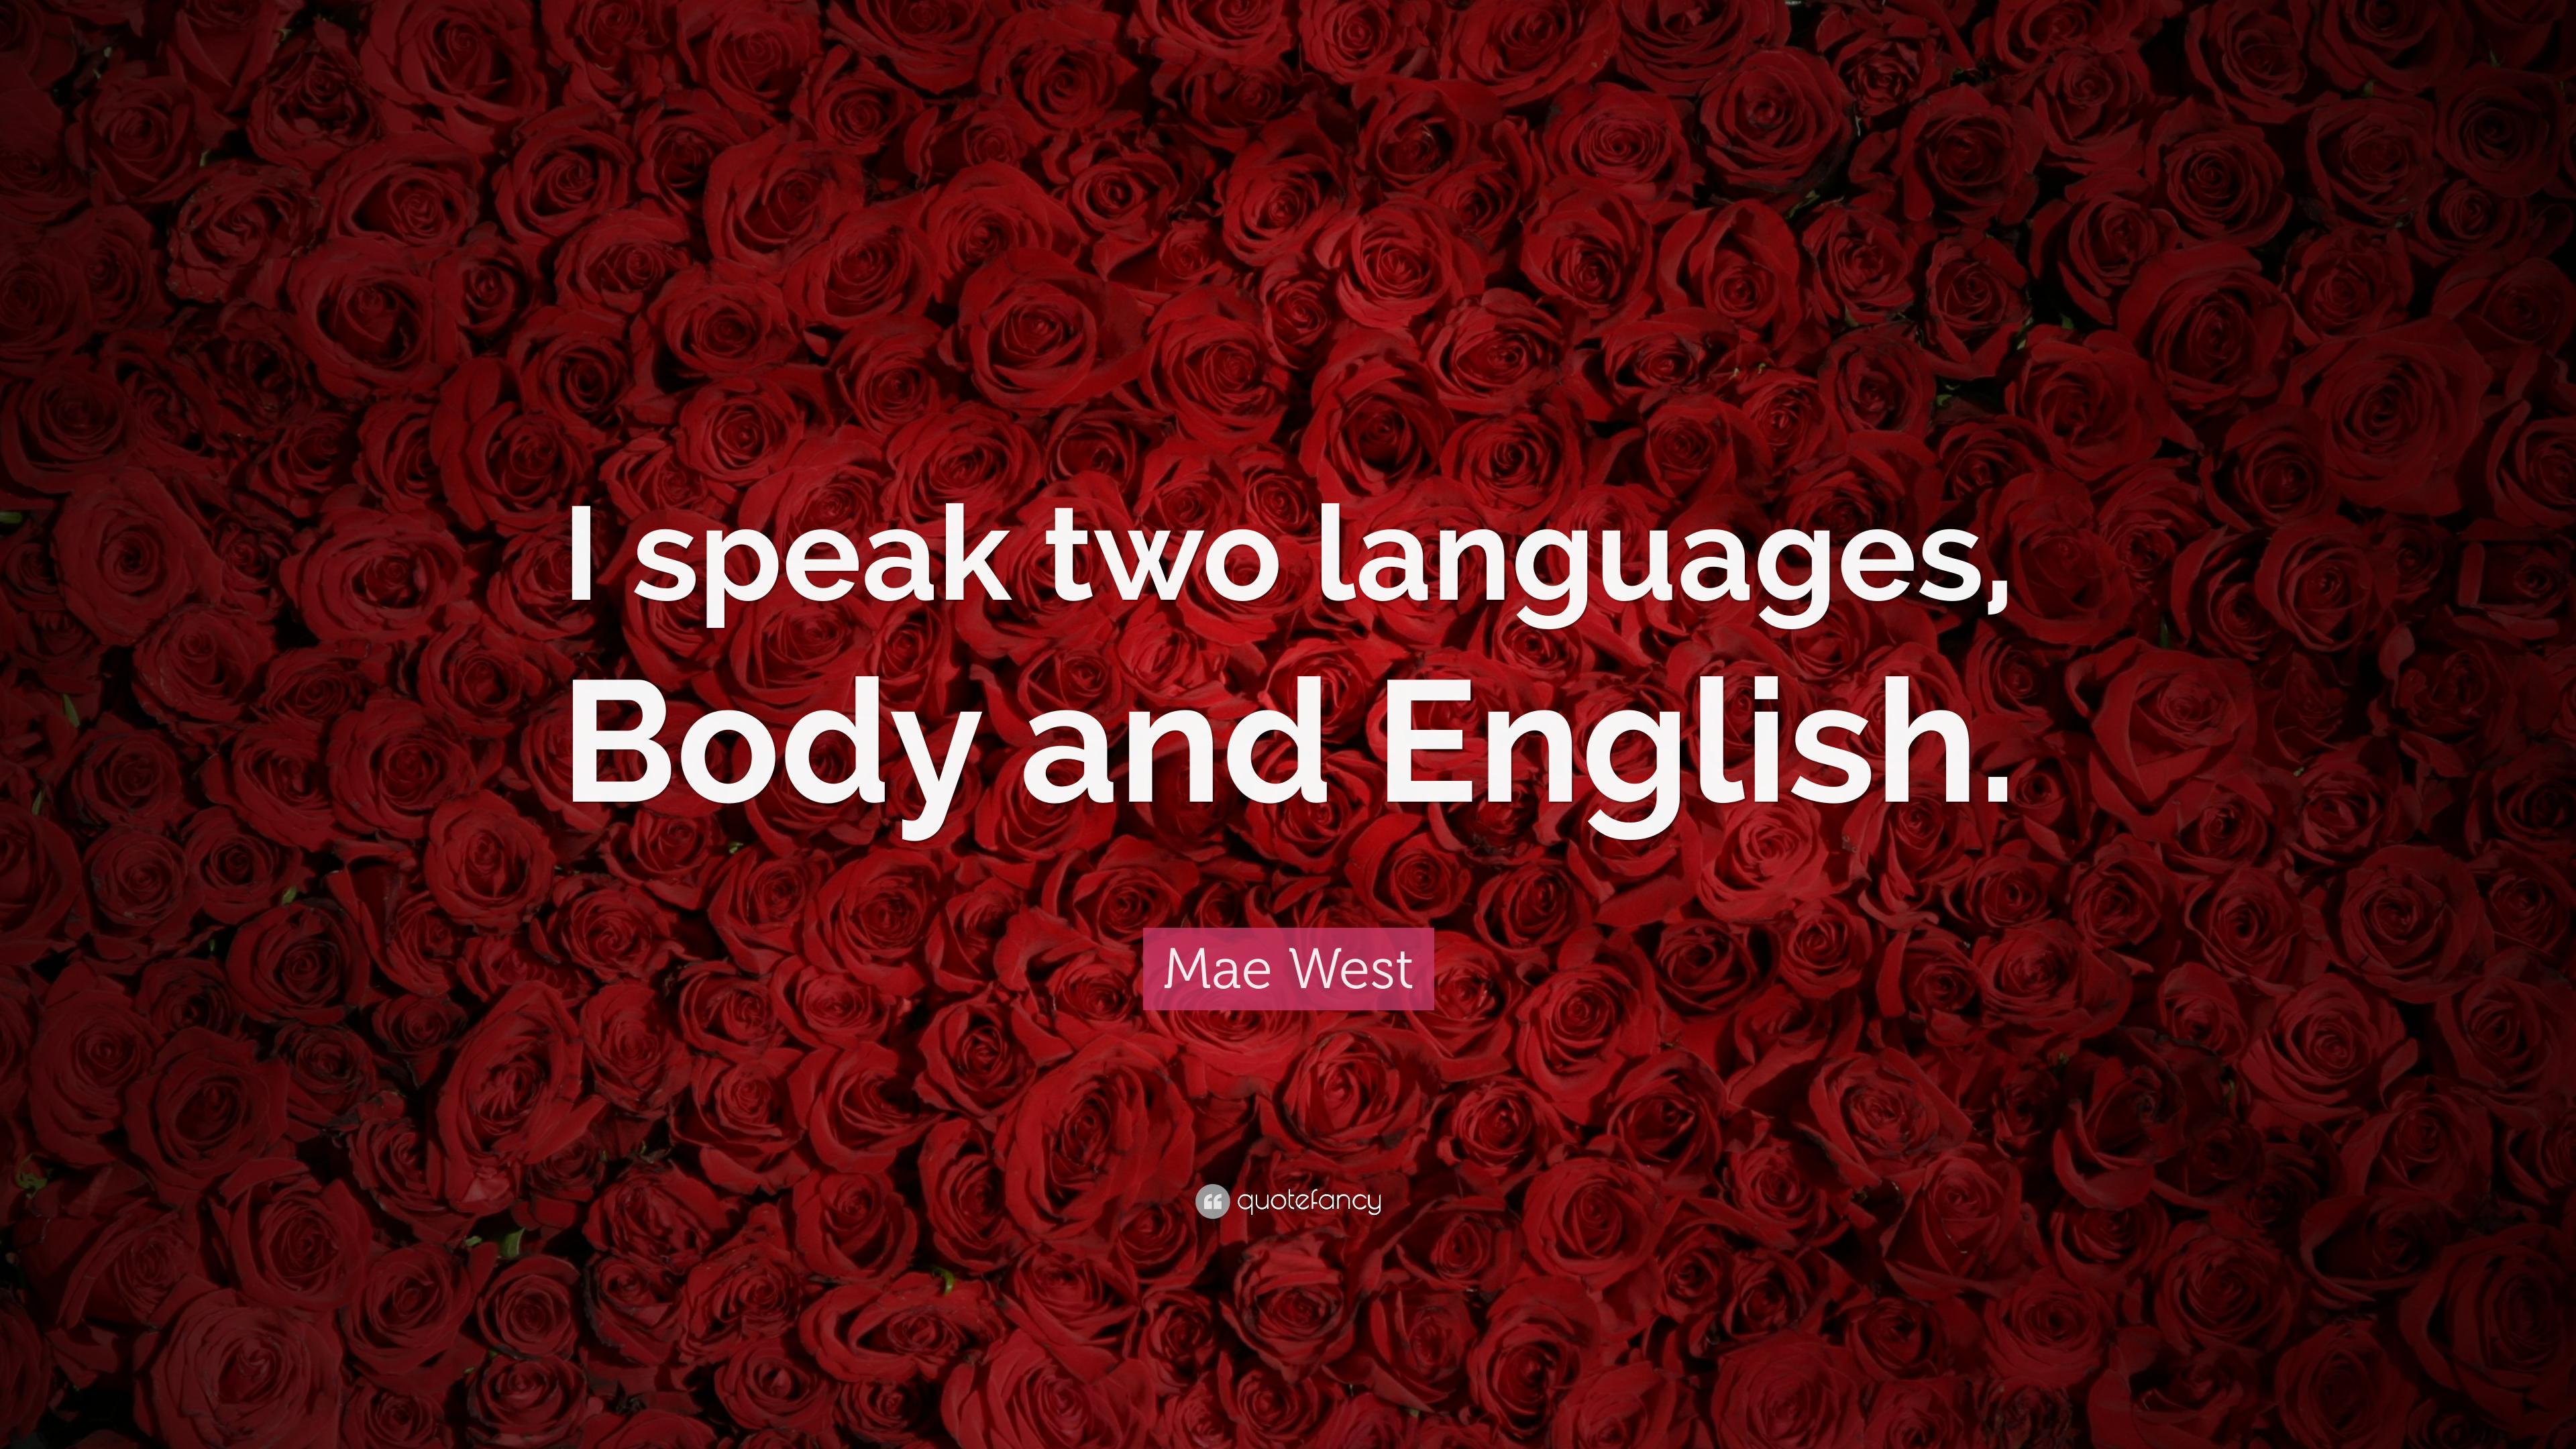 Mae West Quote: “I speak two languages, Body and English.” 18